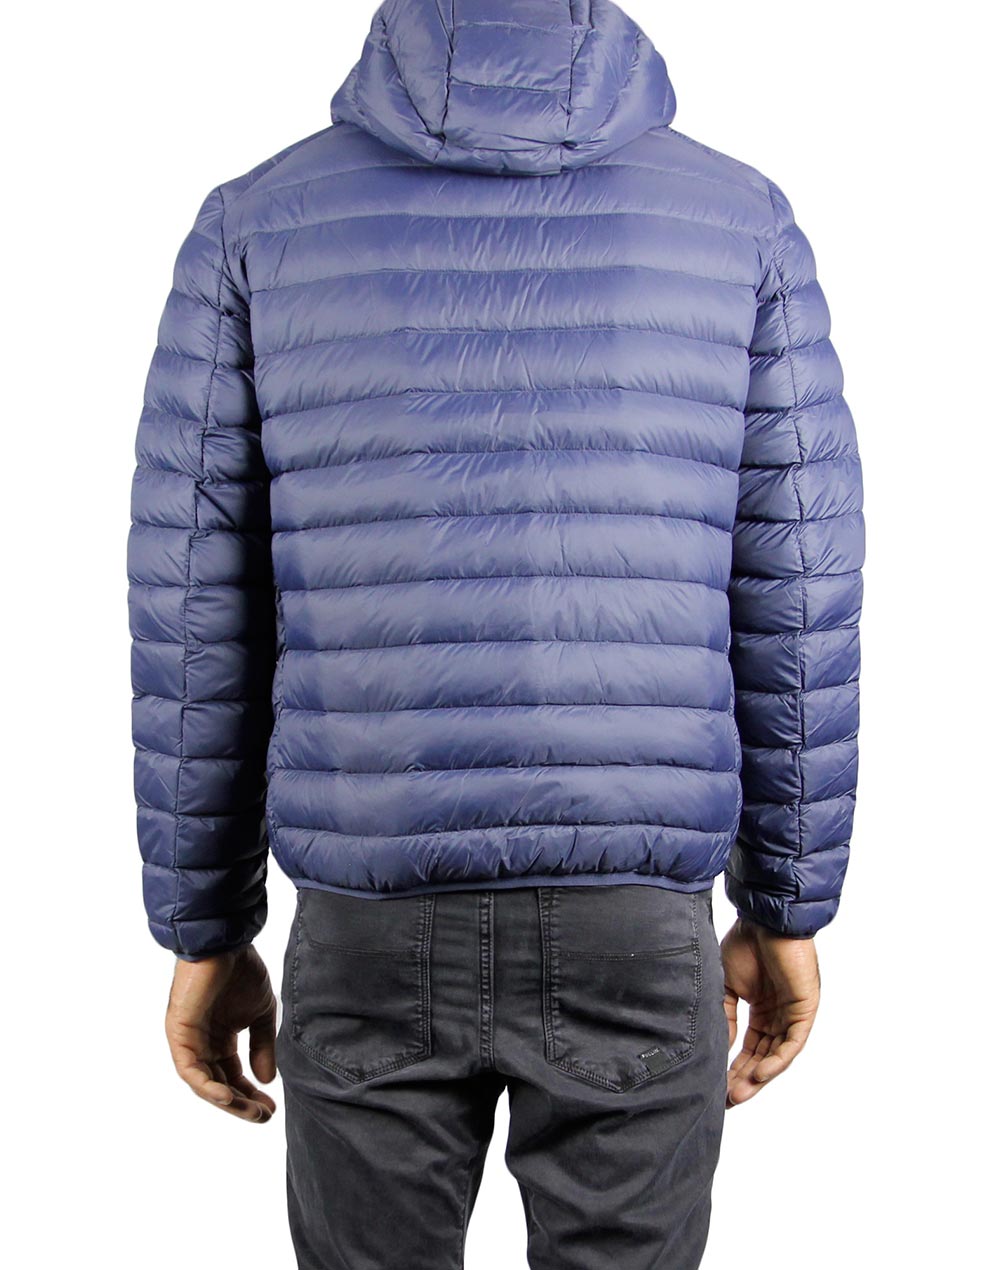 Men's feather jacket with hood AUBE